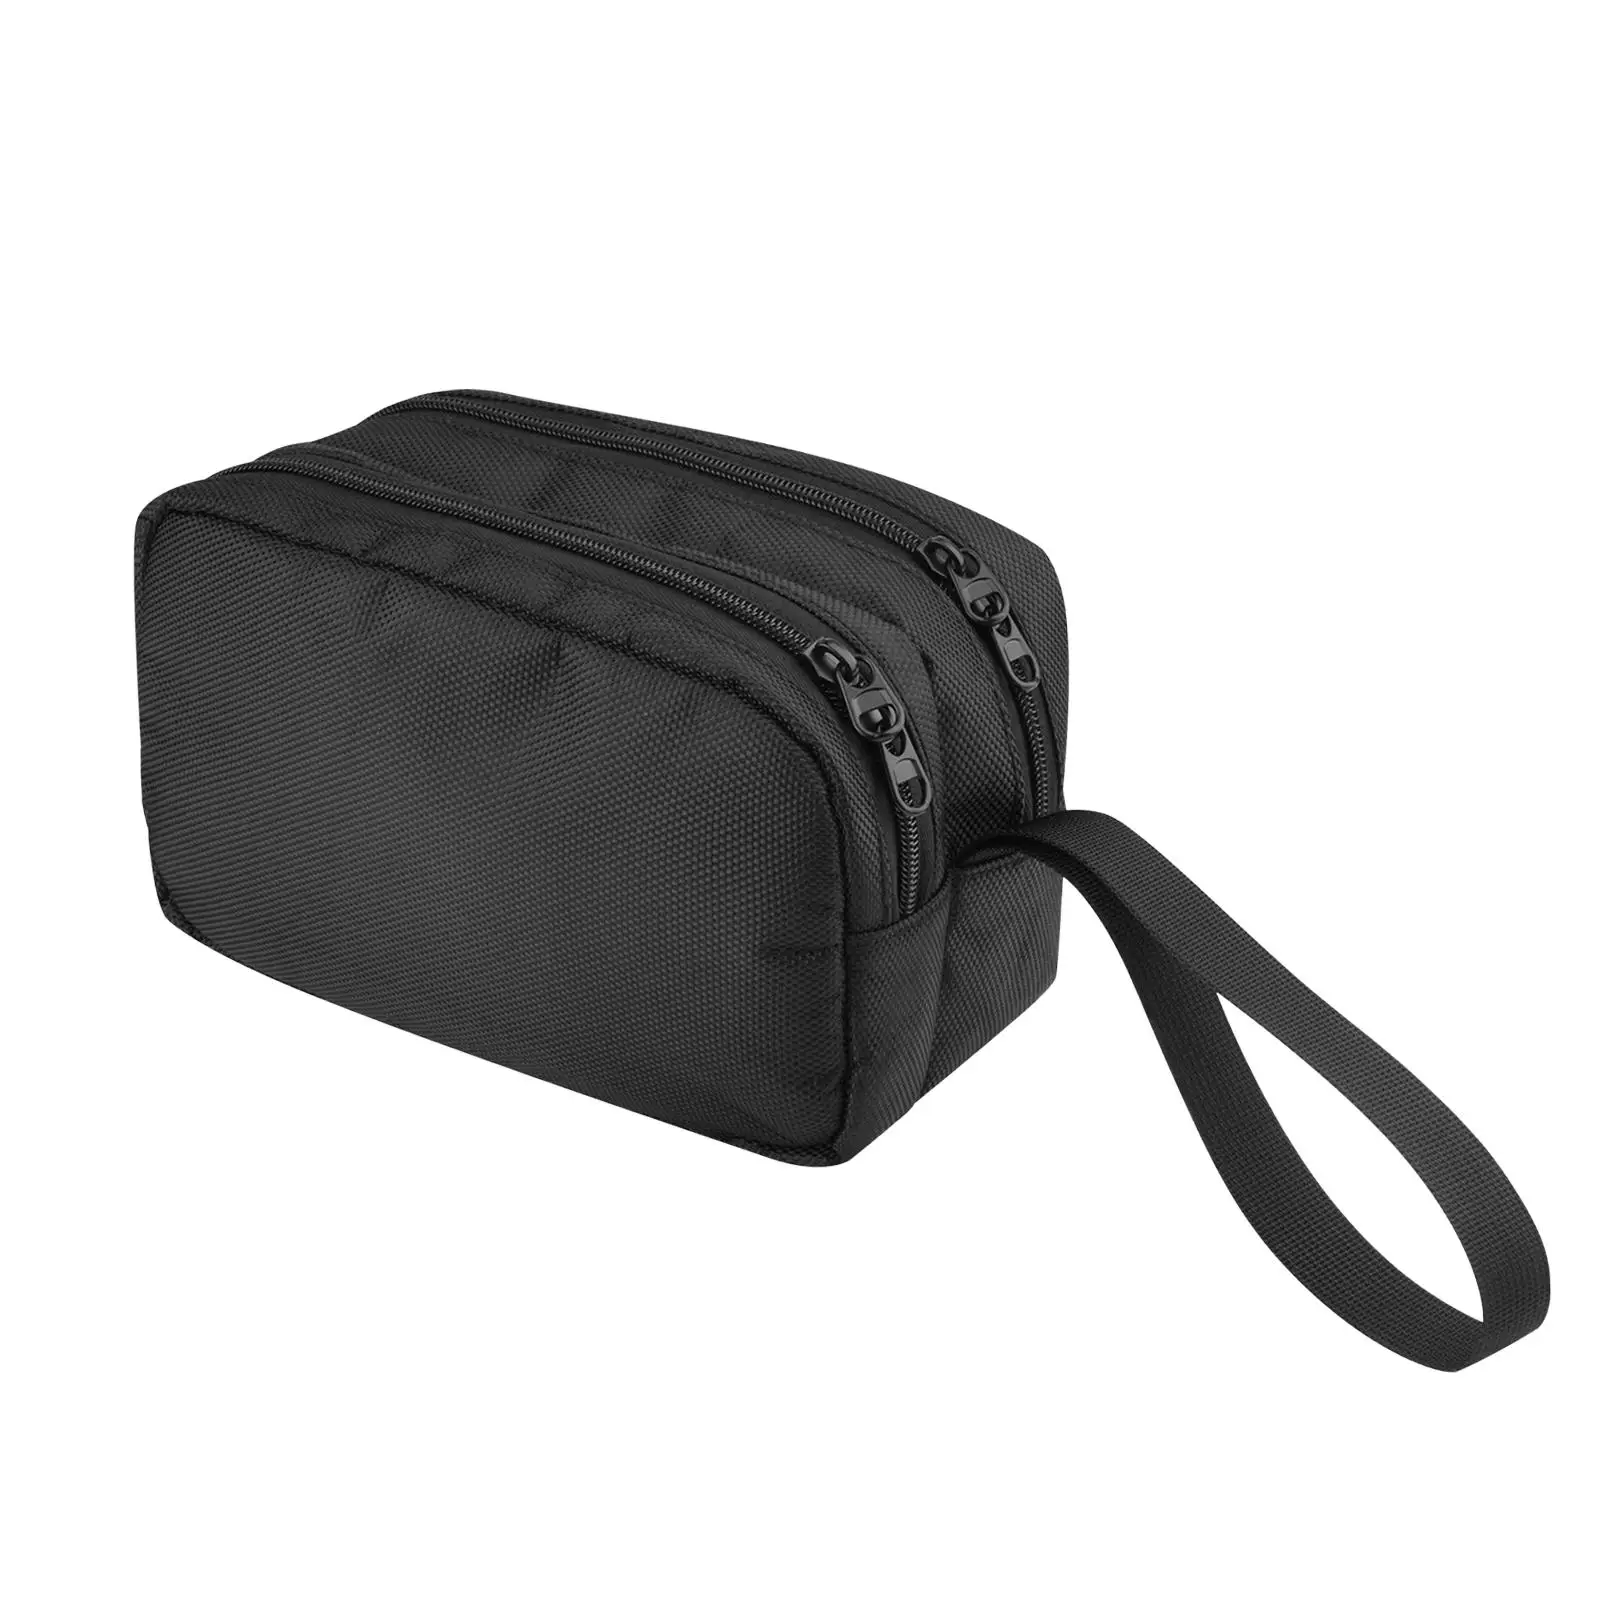 Black Carrying Case Two Dual Zippers Design Nylon Tool Storage Bag for Wires